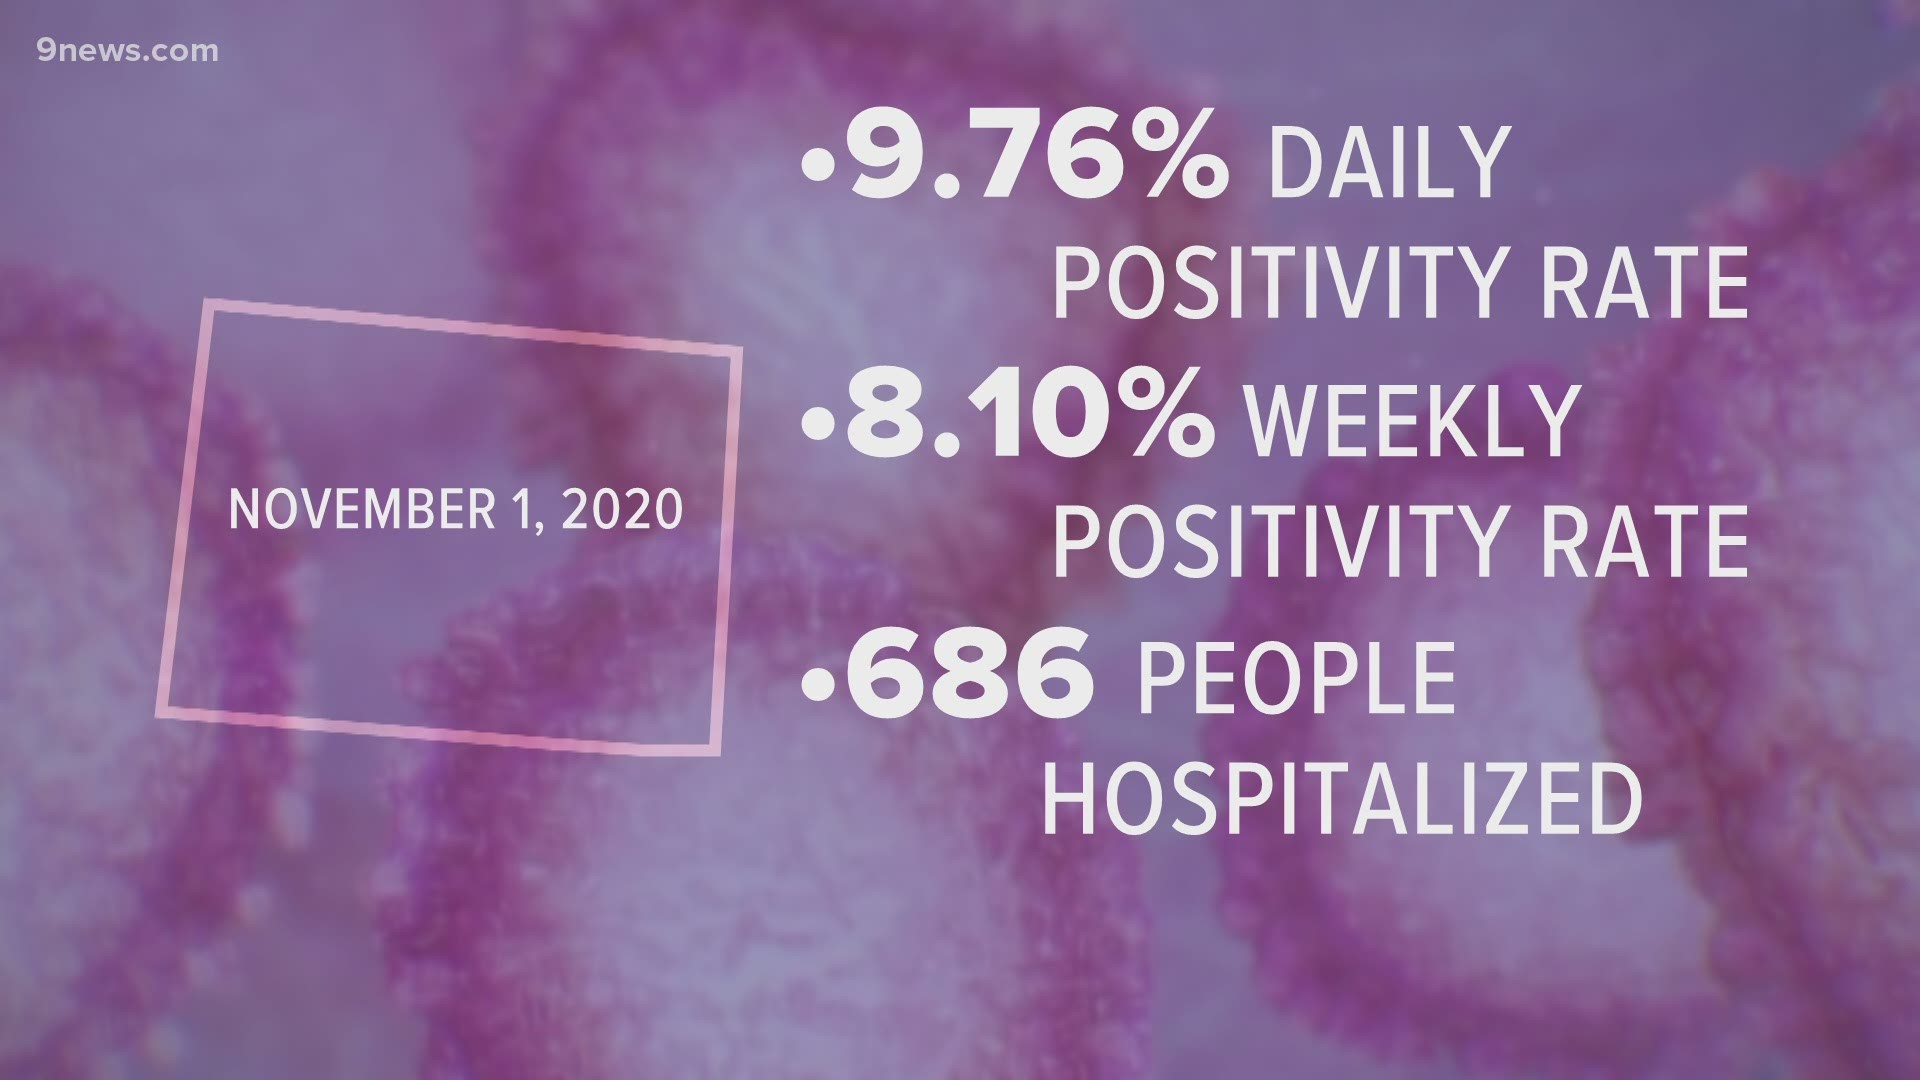 Colorado is seeing an 8% positivity rate, something we haven't seen since the peak earlier this year, and something health officials are concerned about.